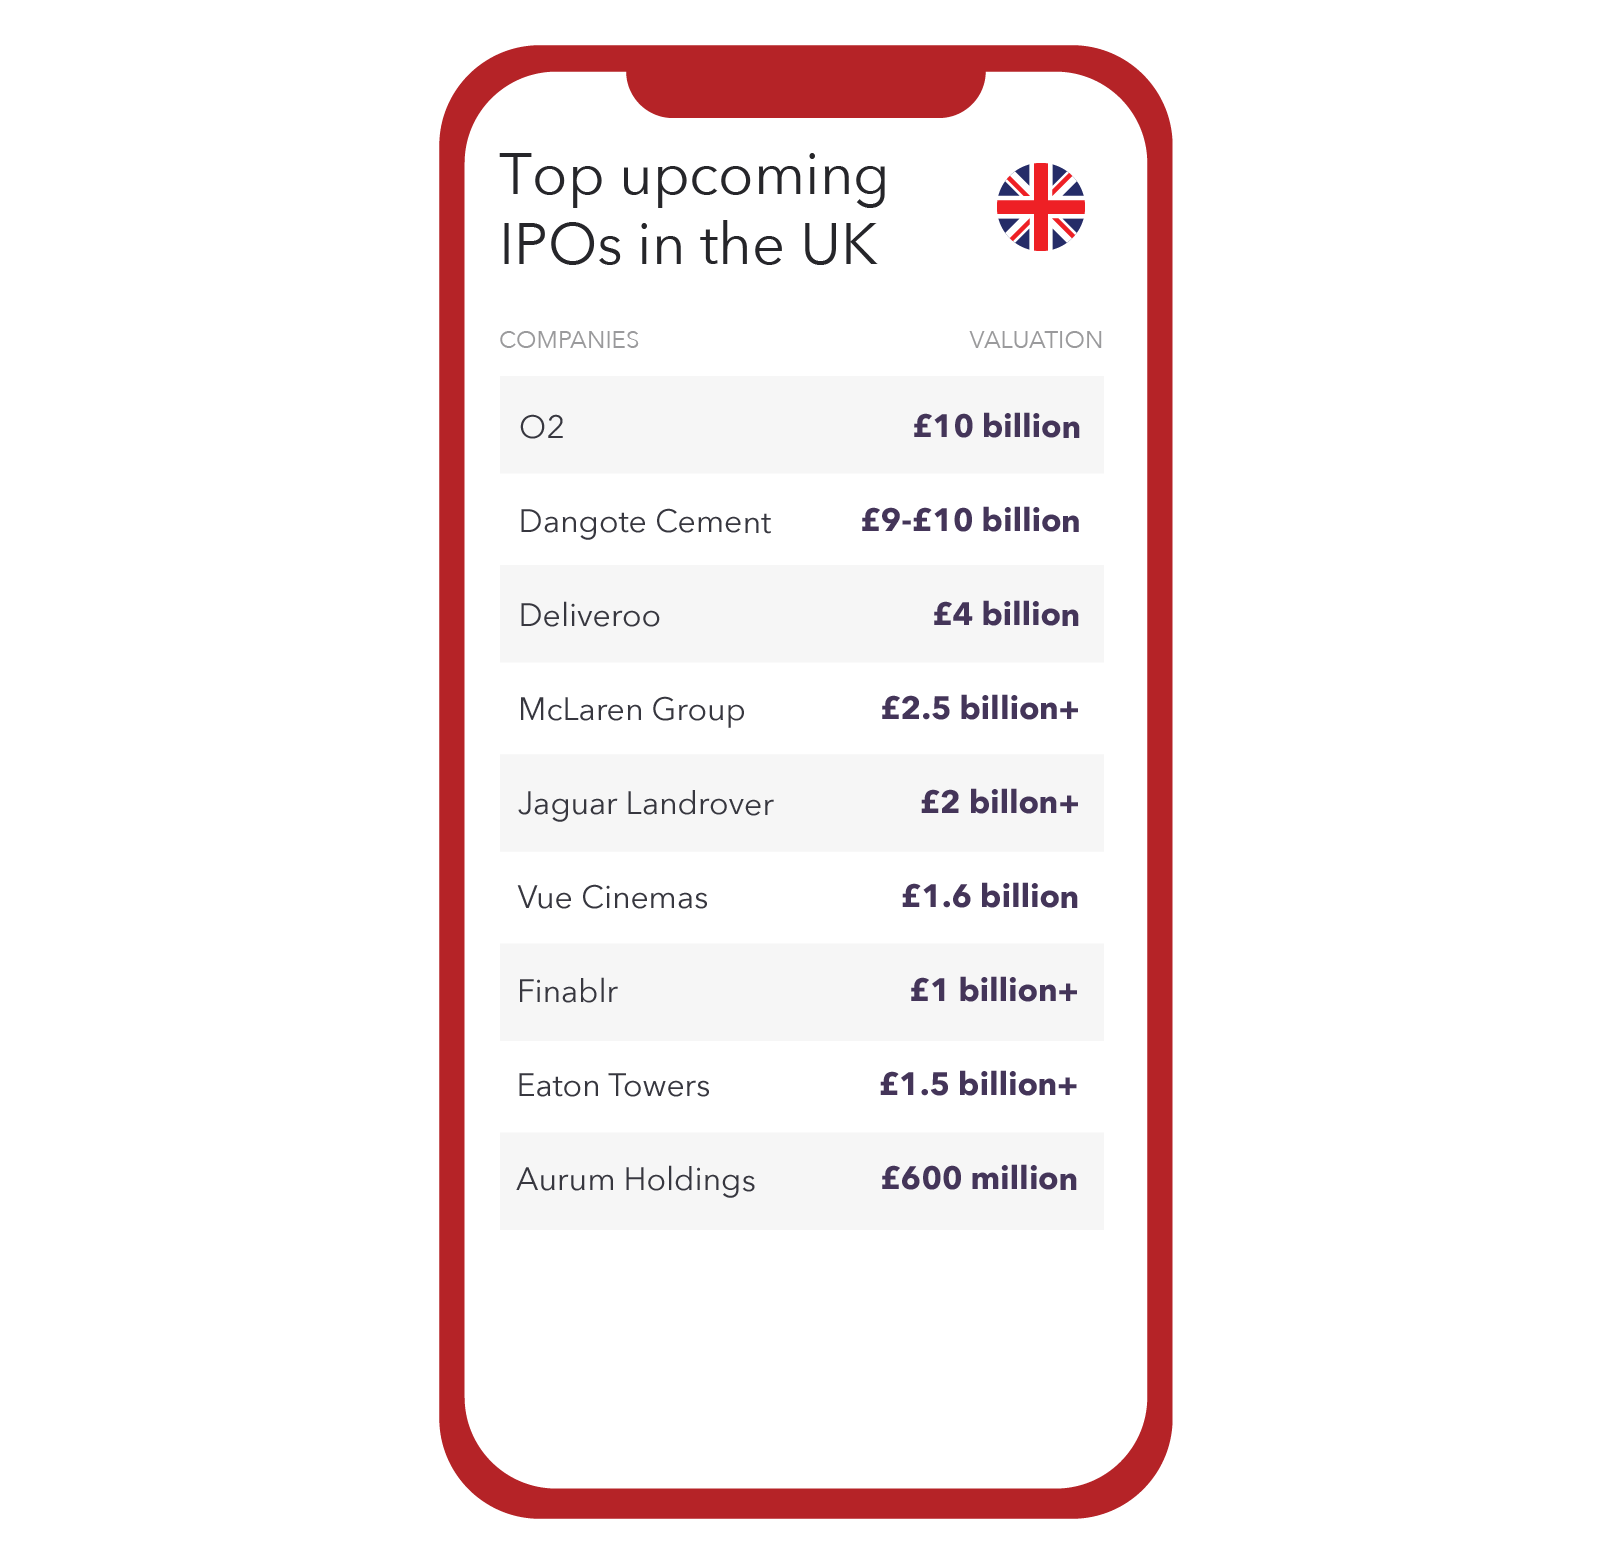 Top upcoming IPOs in the UK 2019